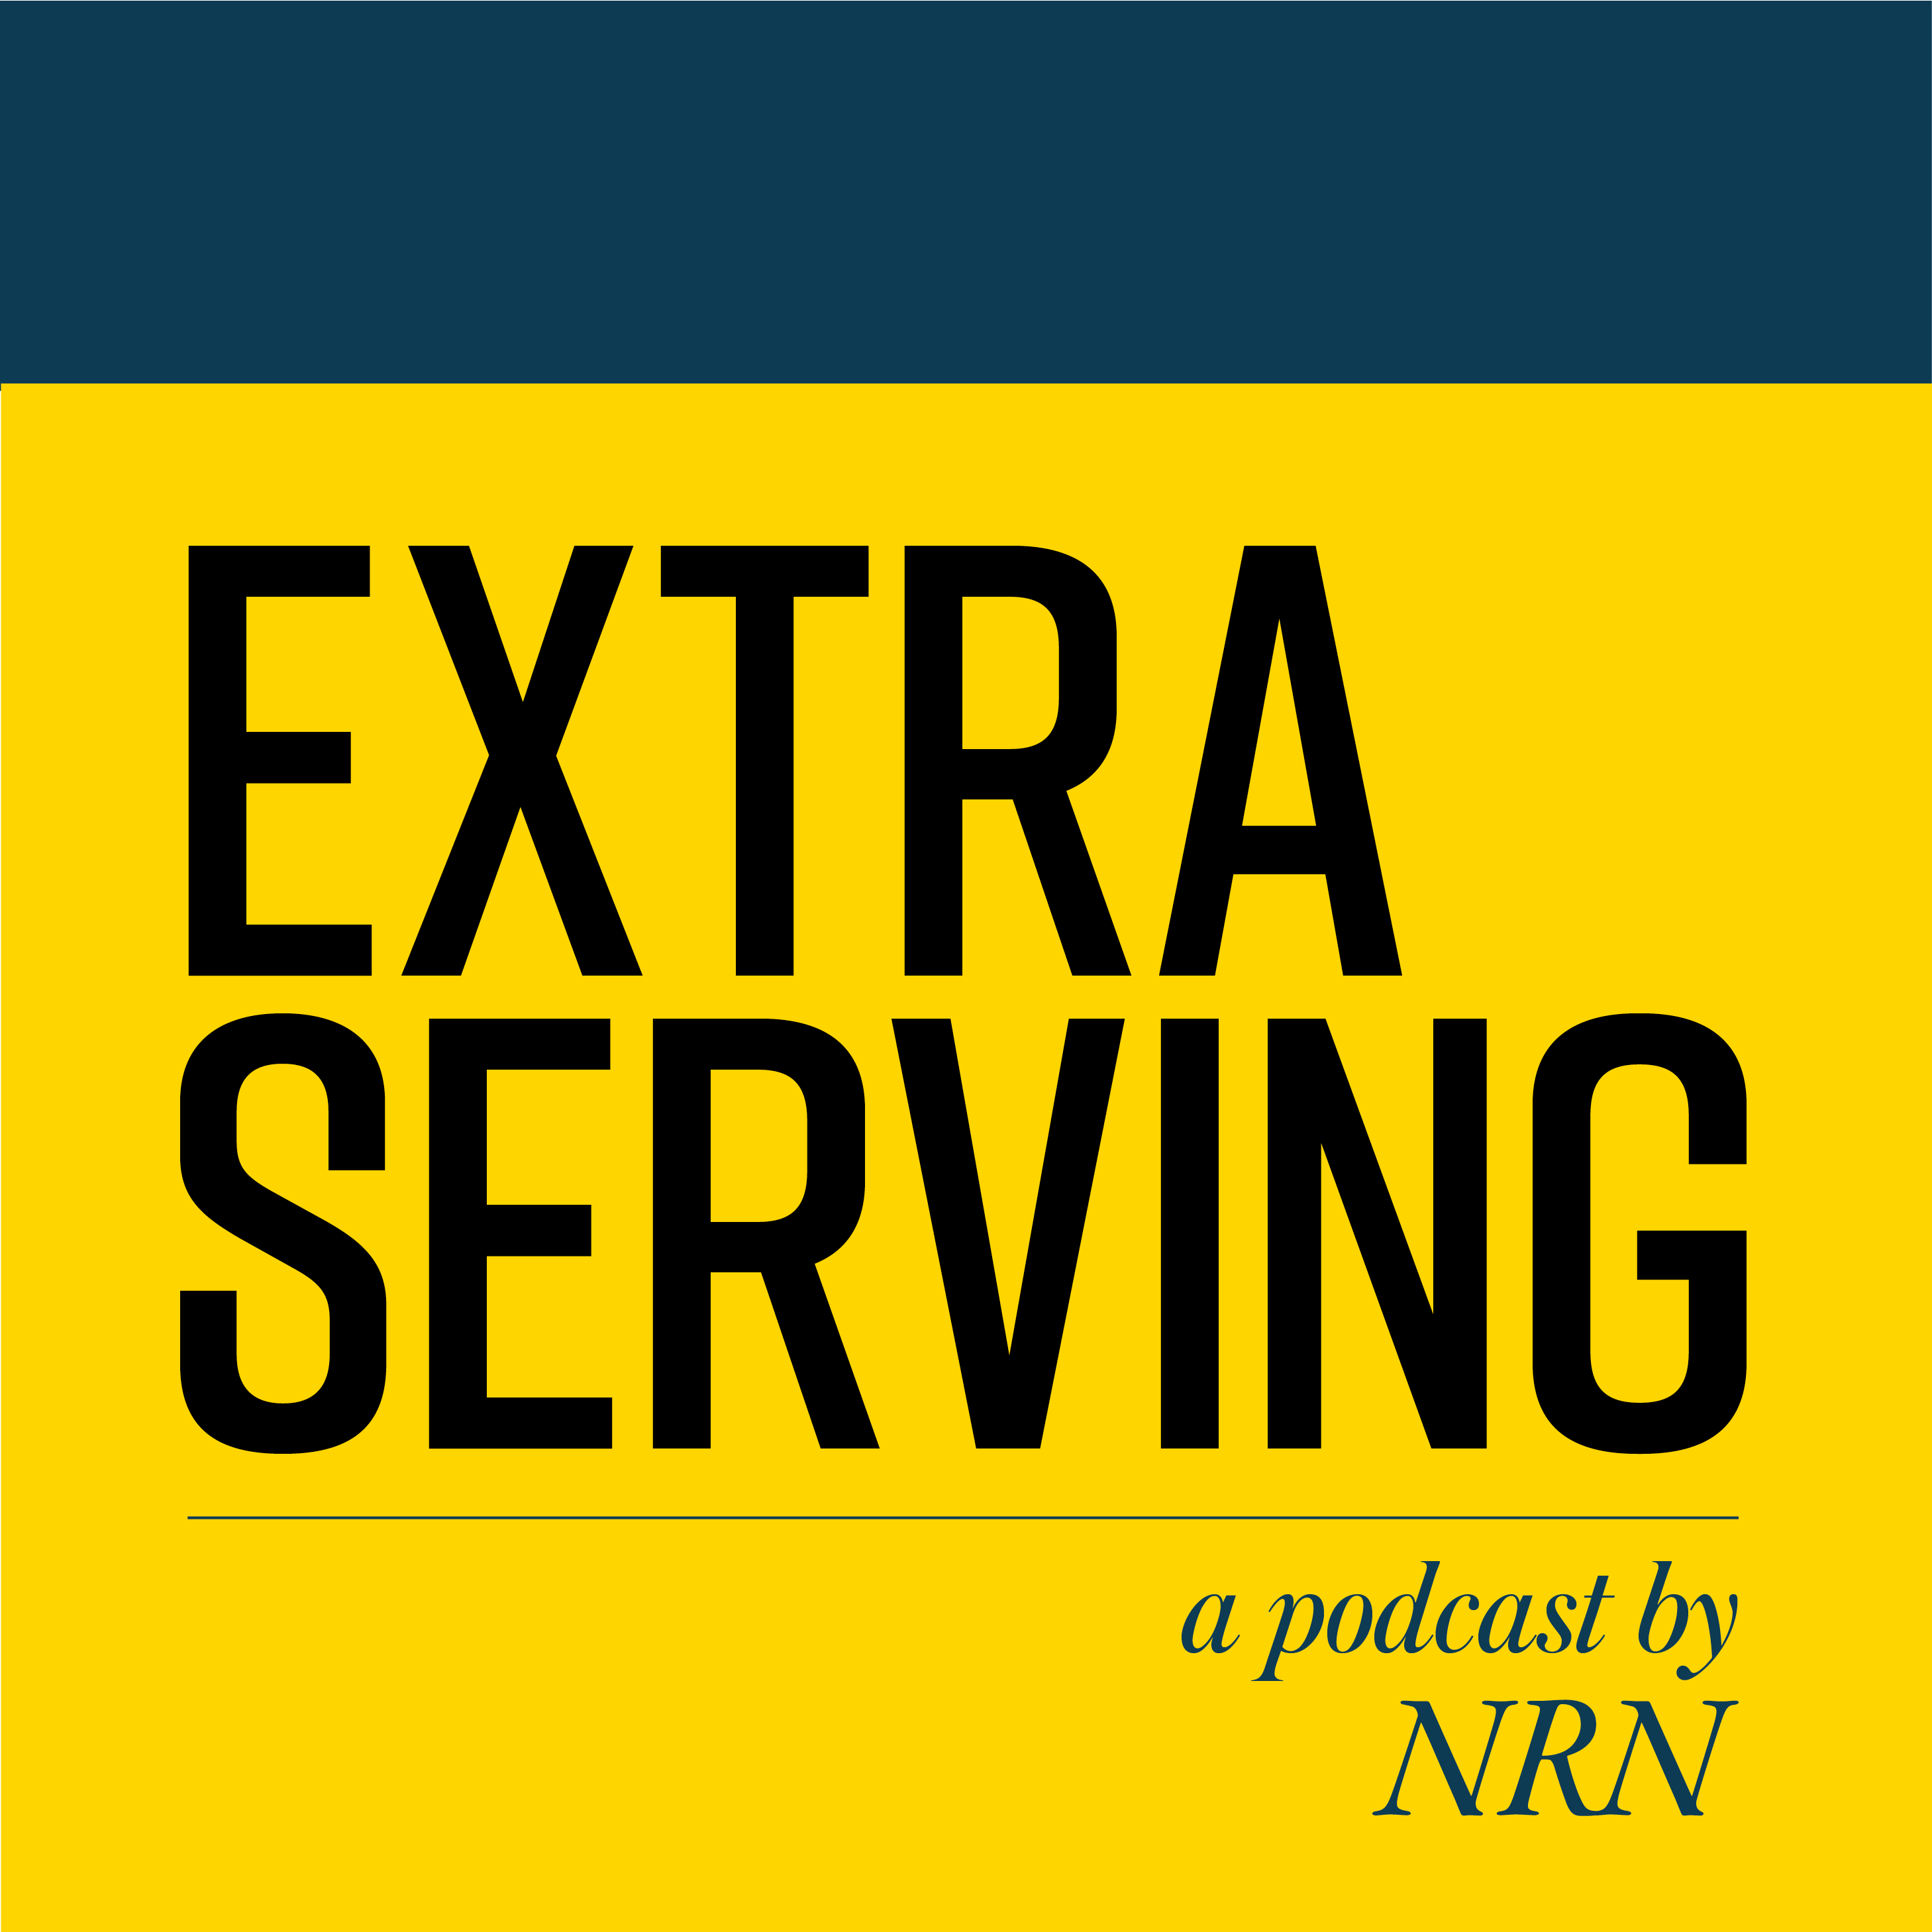 NRN editors discuss Starbucks store closures, McDonald’s buying out franchisees, Dave & Buster’s shaking up the C-suite